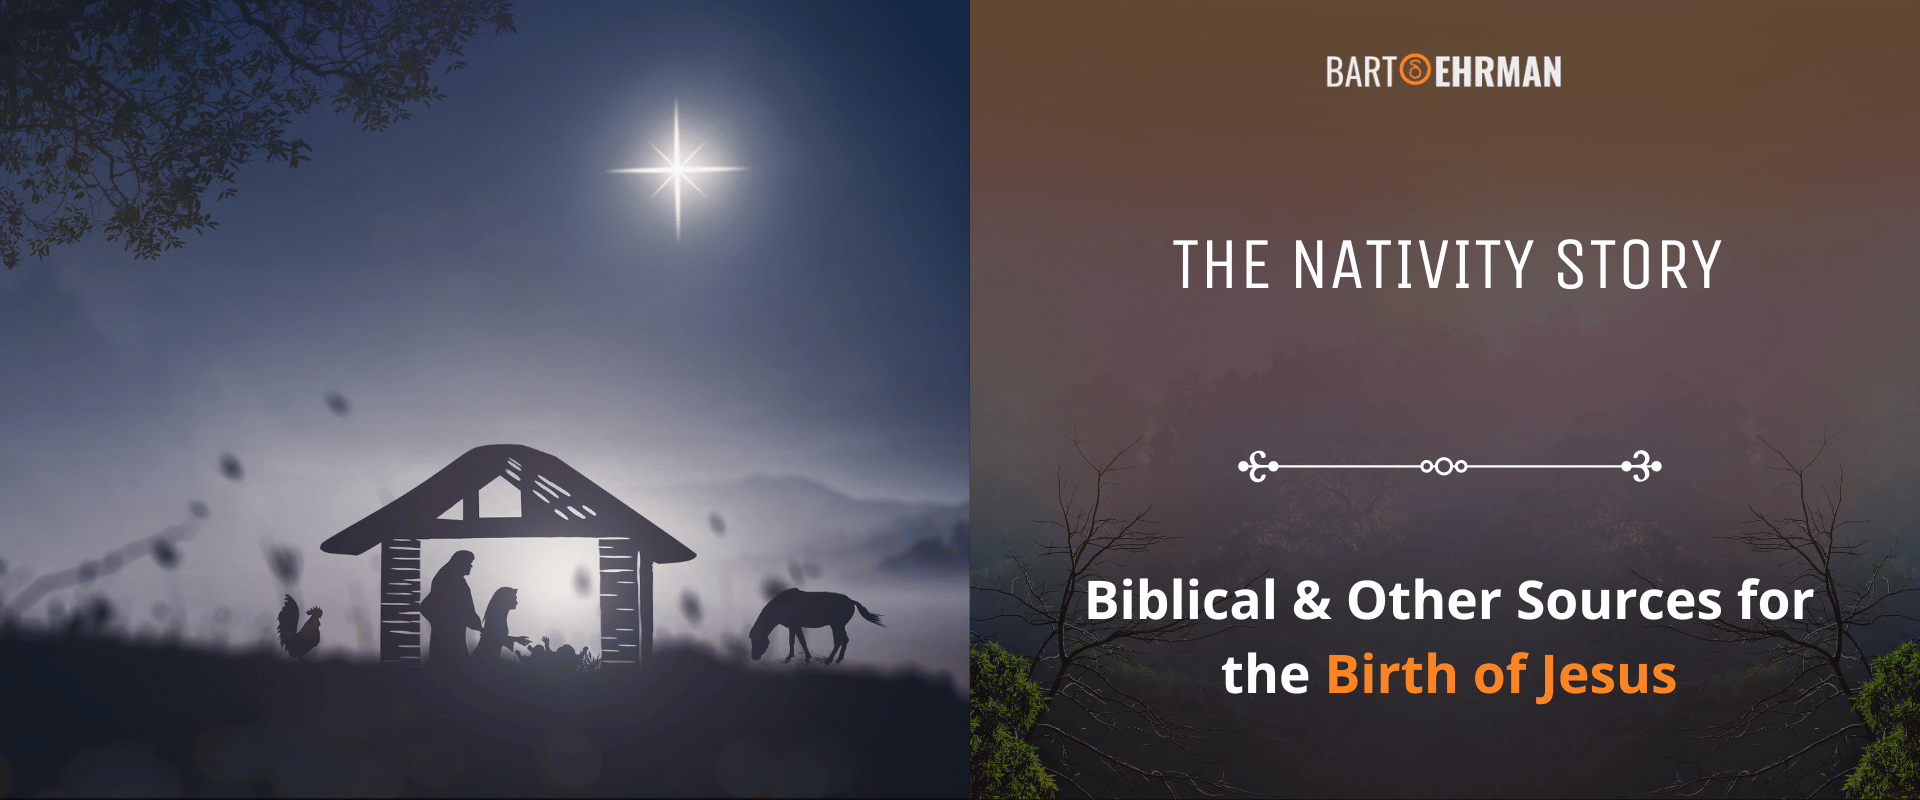 The Nativity Story - Biblical & Other Sources for the Birth of Jesus